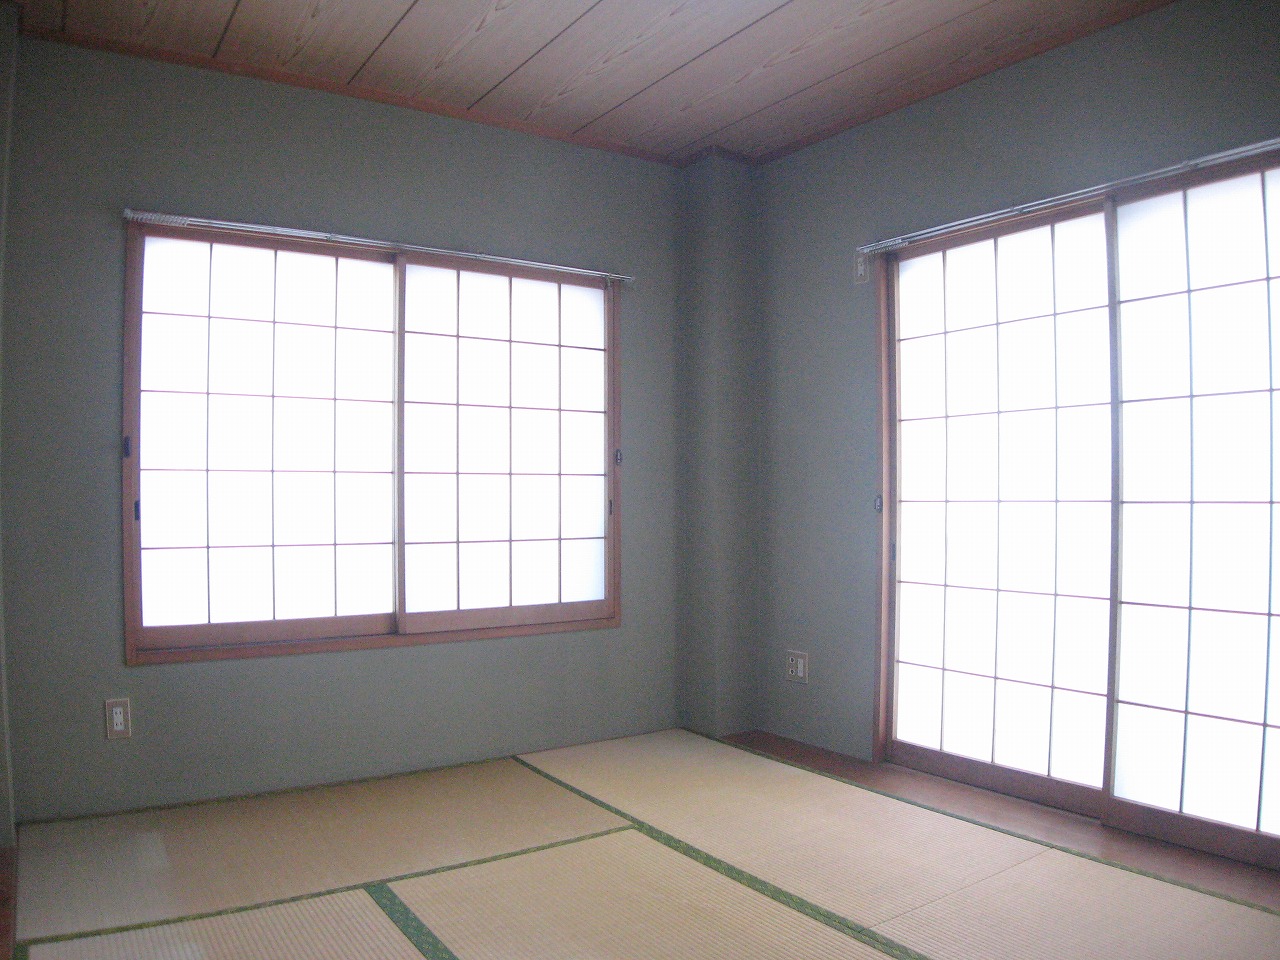 Other room space. It will be healed in the light coming through also equipped shoji Japanese-style room